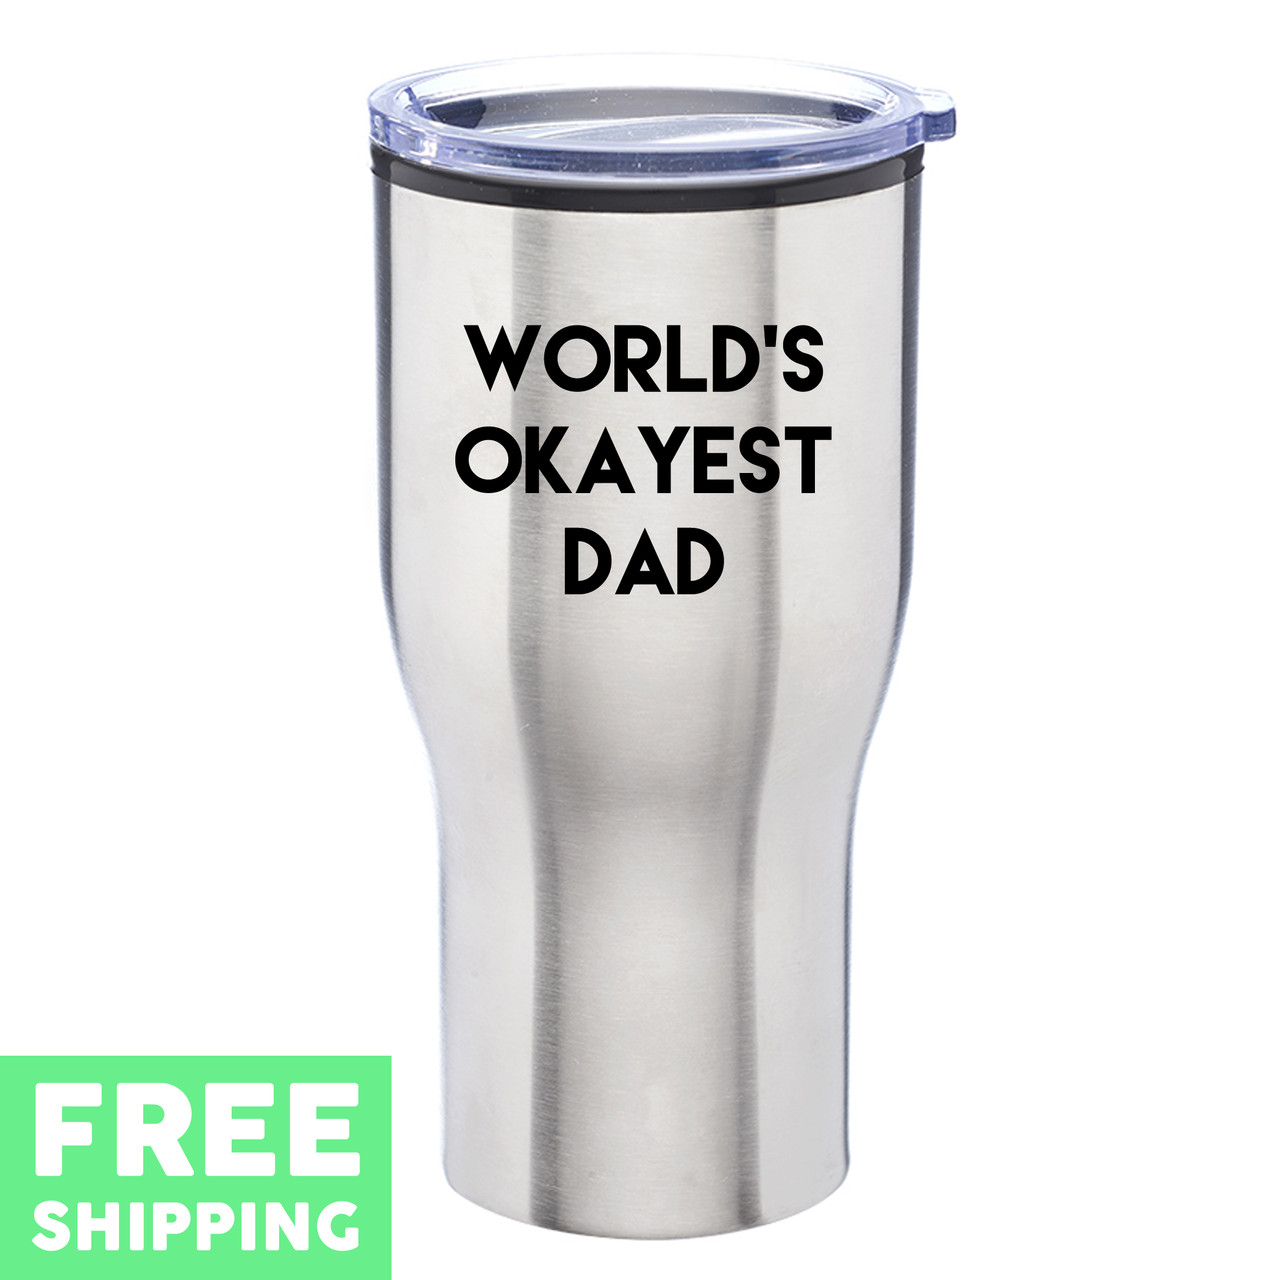 World's Okayest Dad, Engraved Gift, Sweetums Signatures